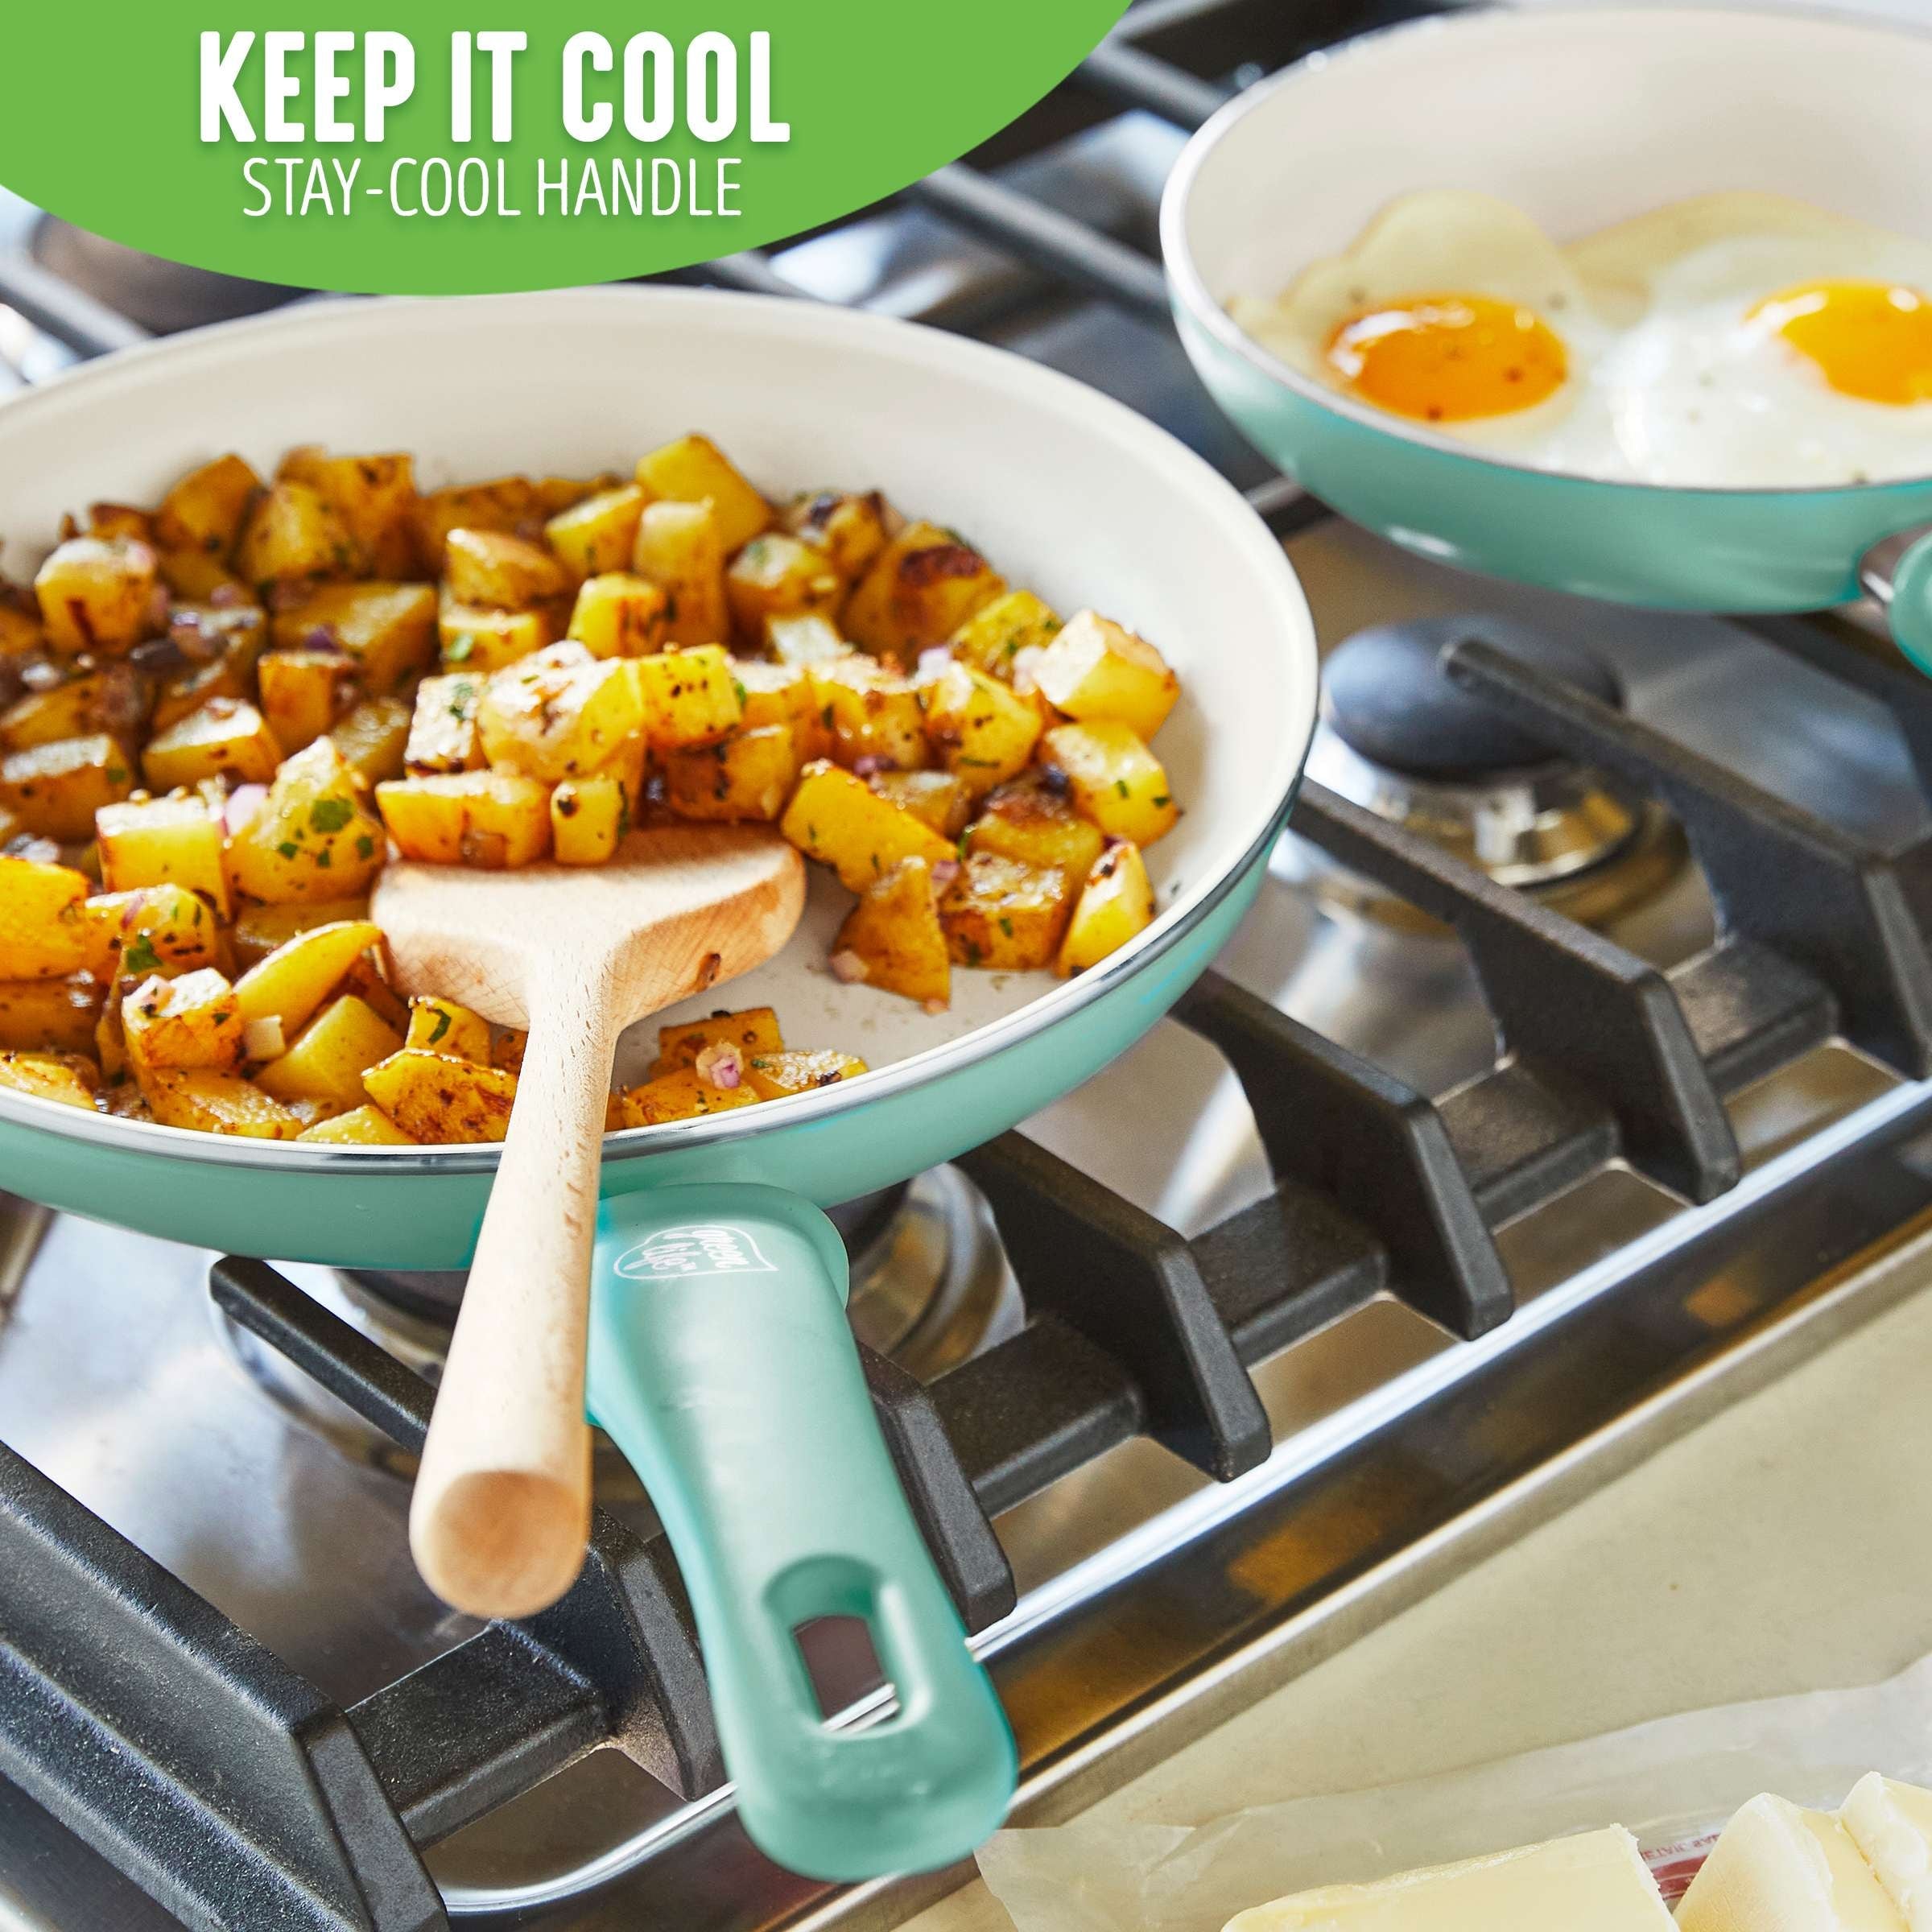 https://ak1.ostkcdn.com/images/products/is/images/direct/651102ff9147508e1f632f8f0d23d241267a6566/GreenLife-Soft-Grip-3pc-Frying-Pan-Set-%288%22%2C-10%22-%26-12%22%29.jpg